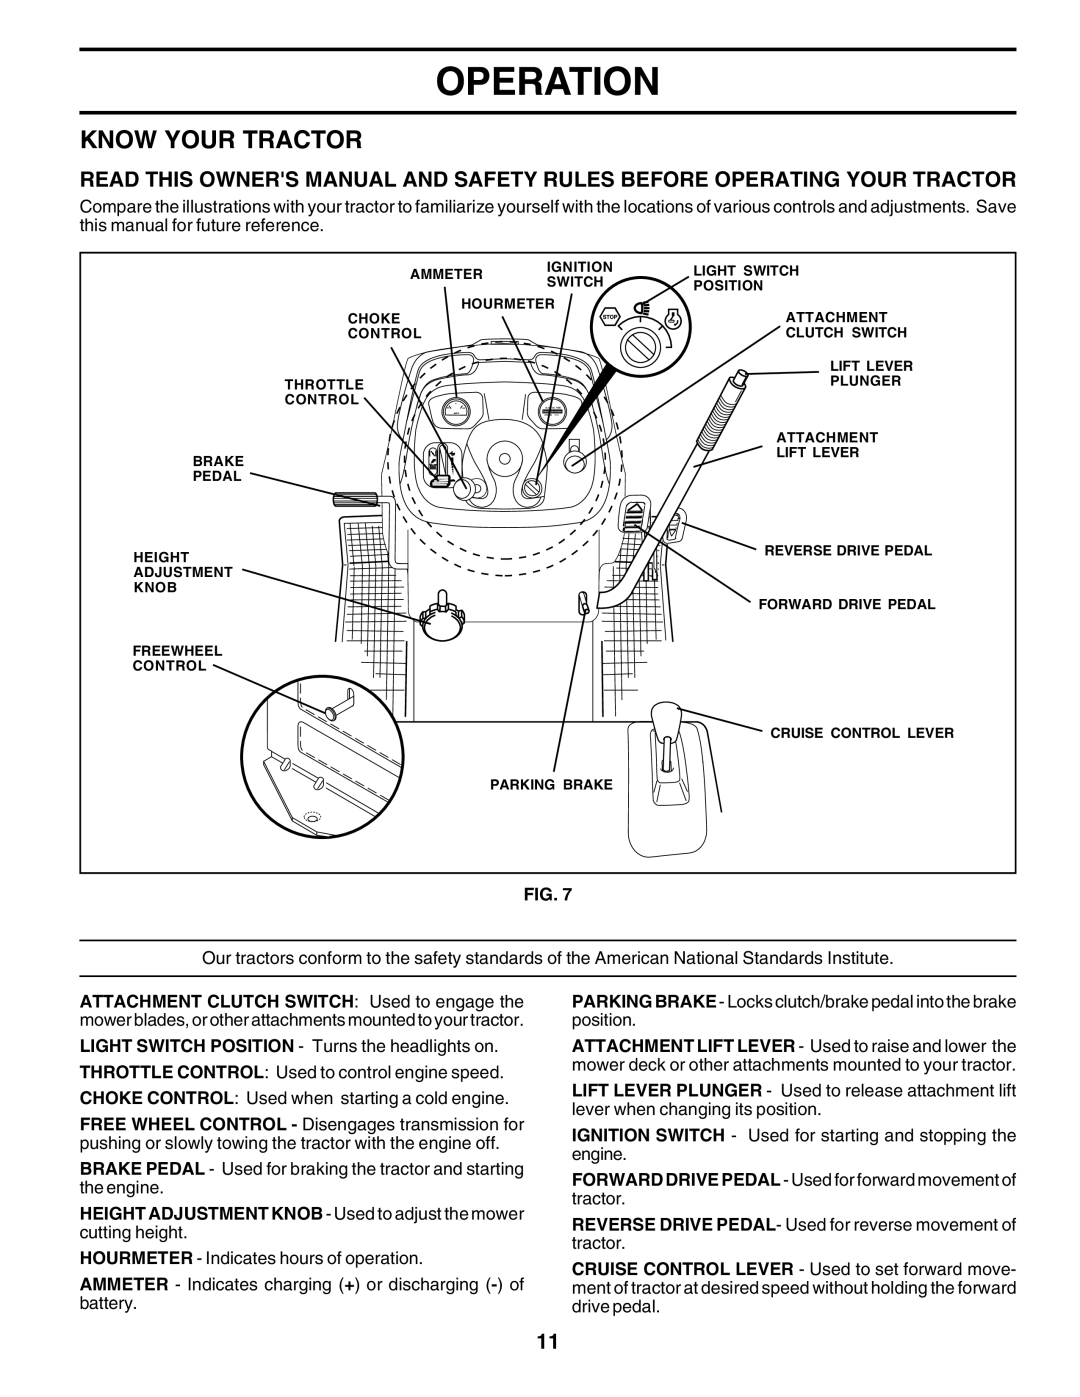 Poulan 180278 owner manual Know Your Tractor, Operation 